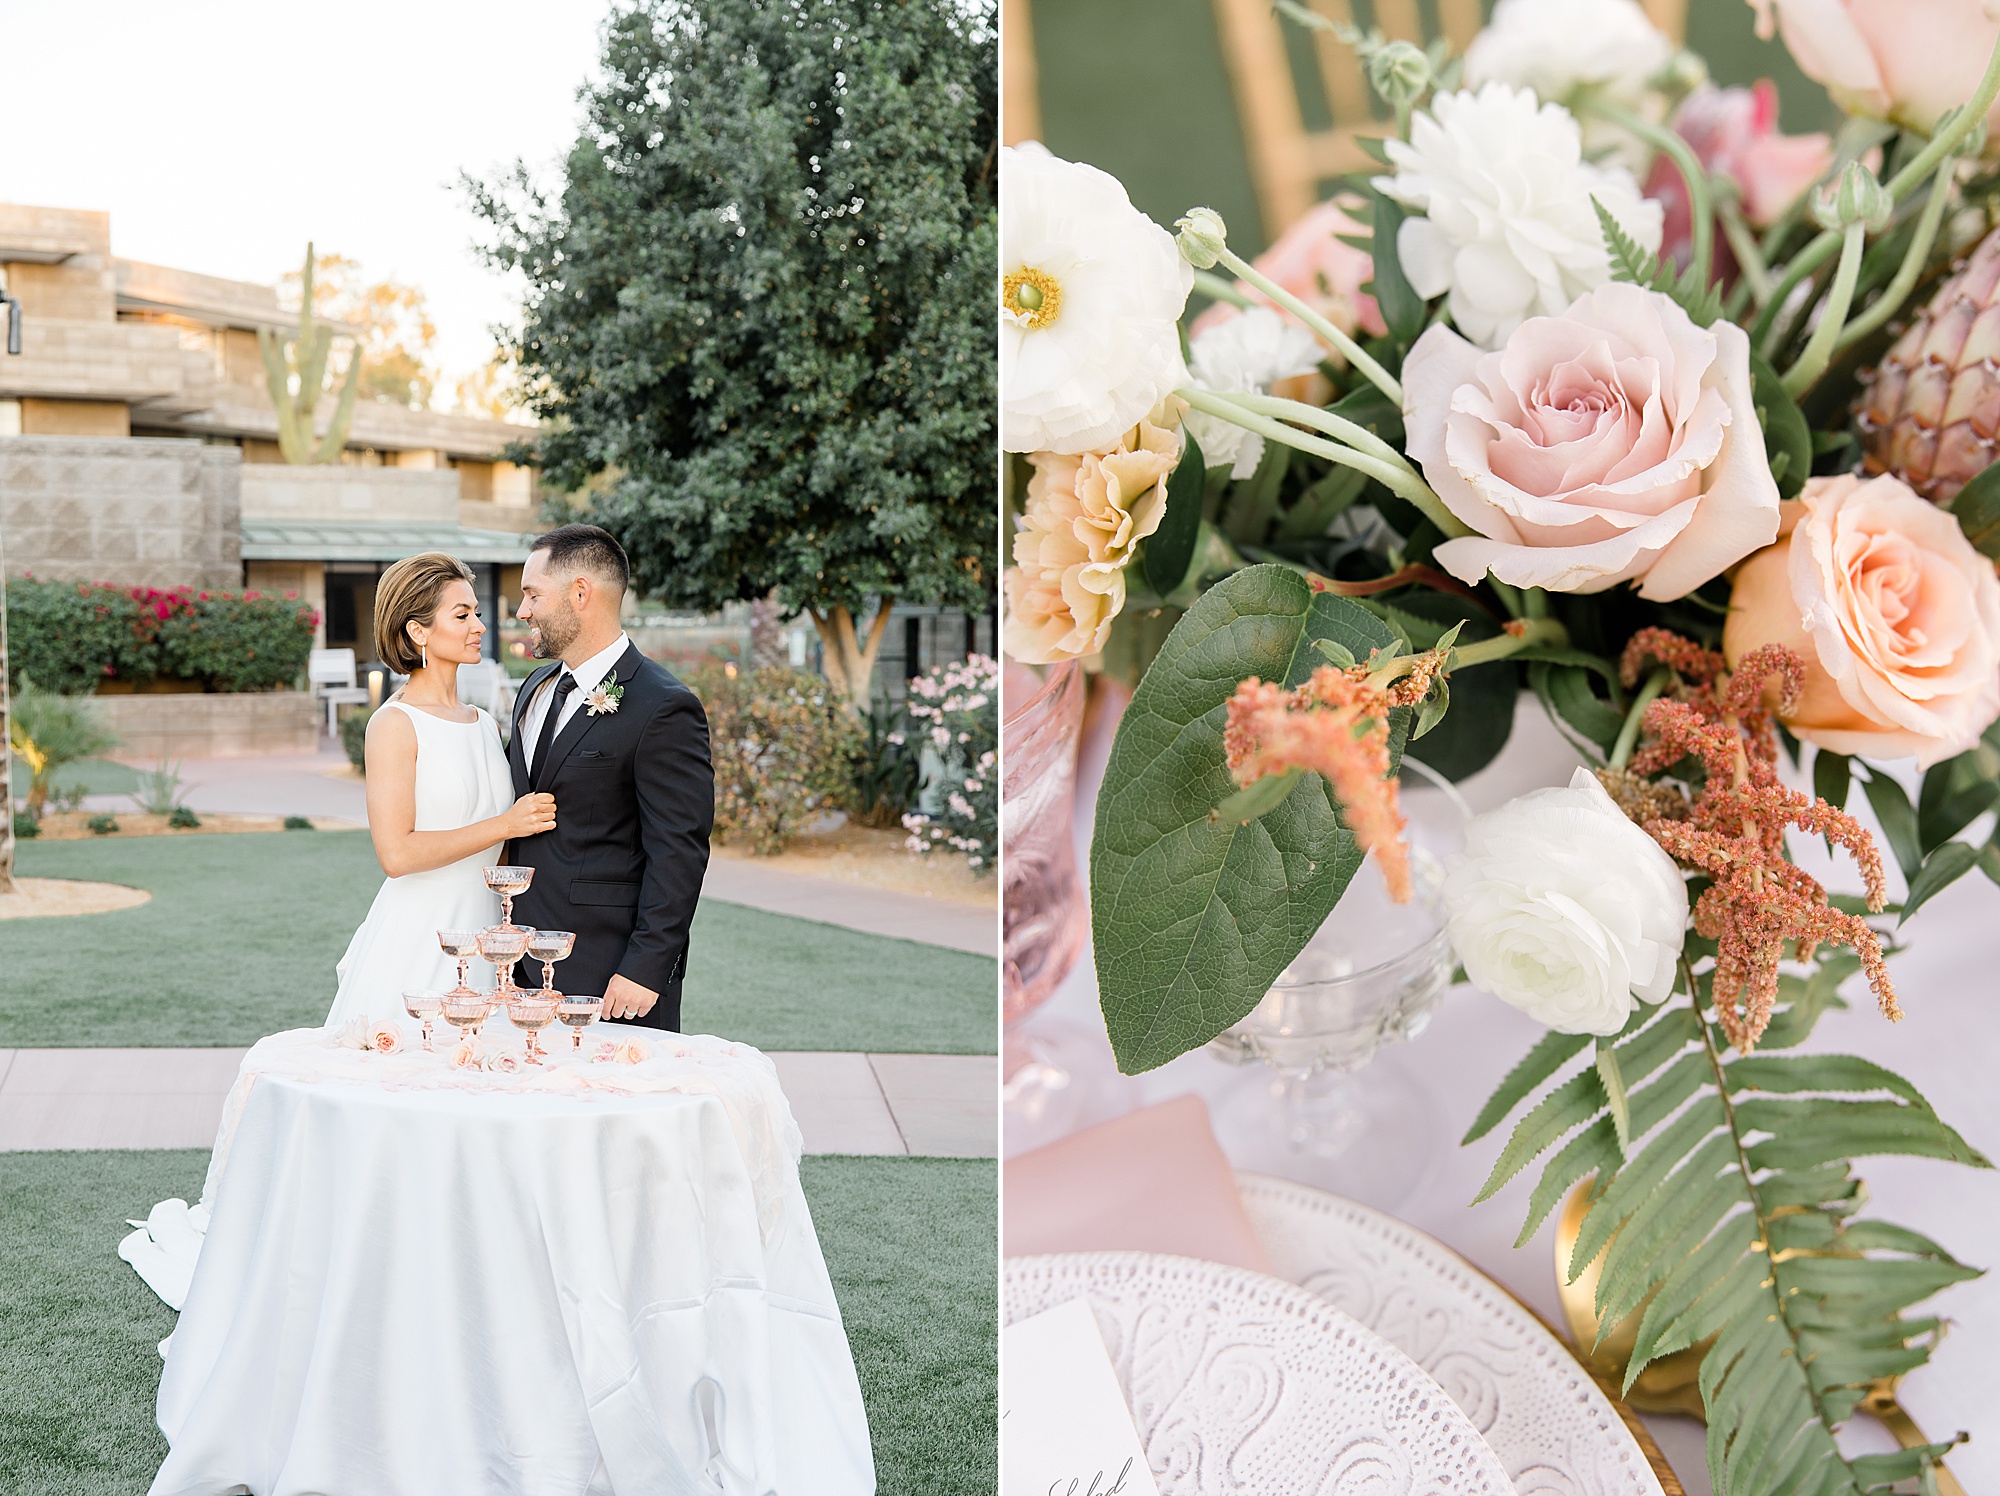 desert inspired styled shoot wedding reception with ink and gold details 